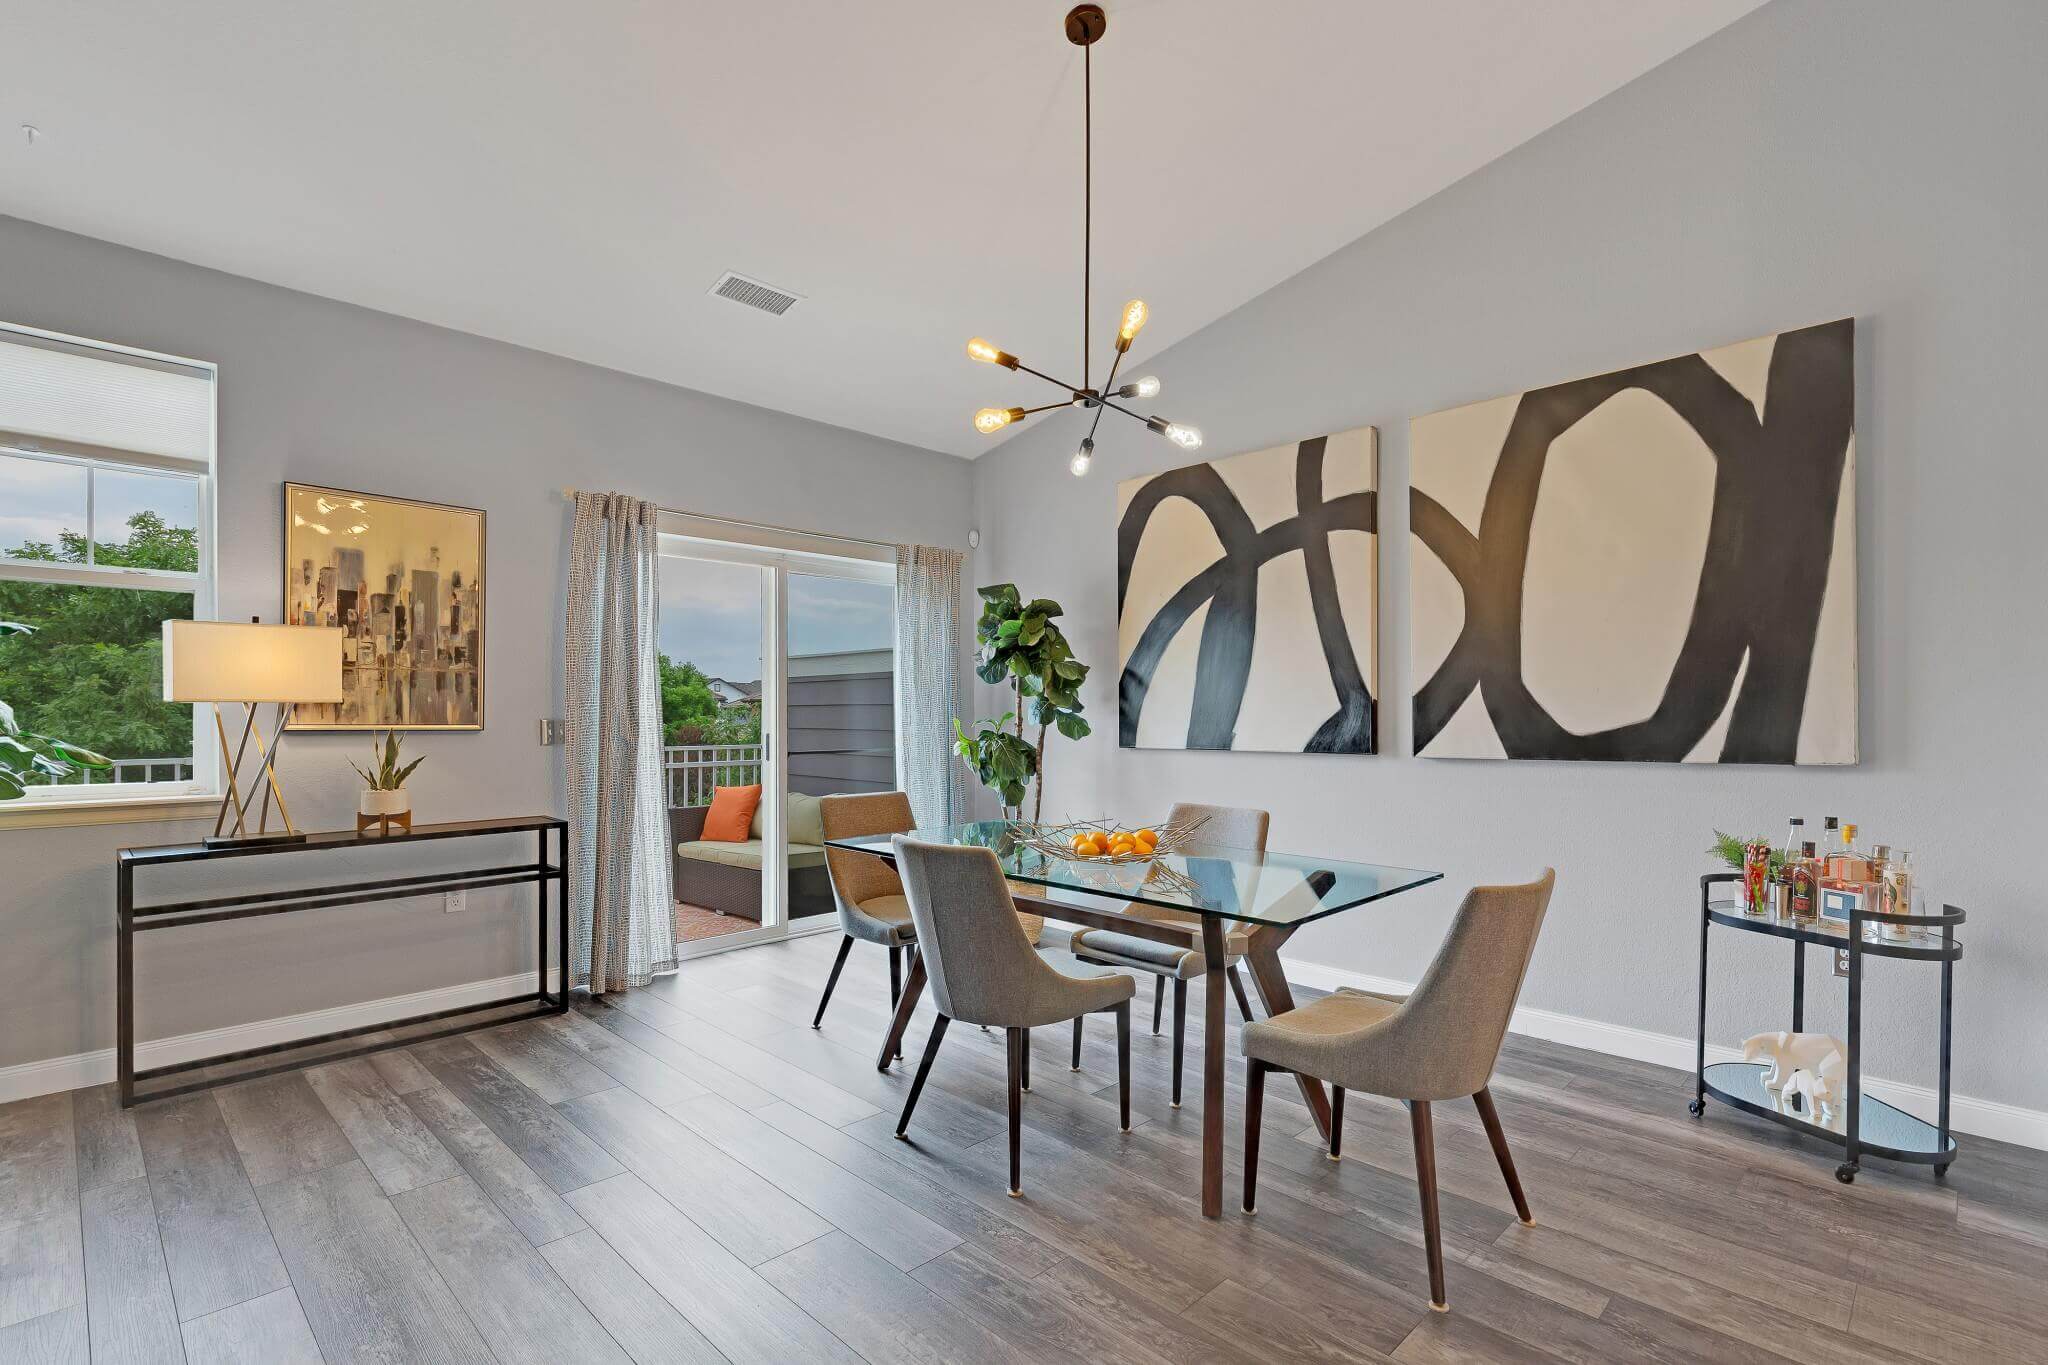 Large dining room with glass table and modern chairs, wood floor and art on the wall.